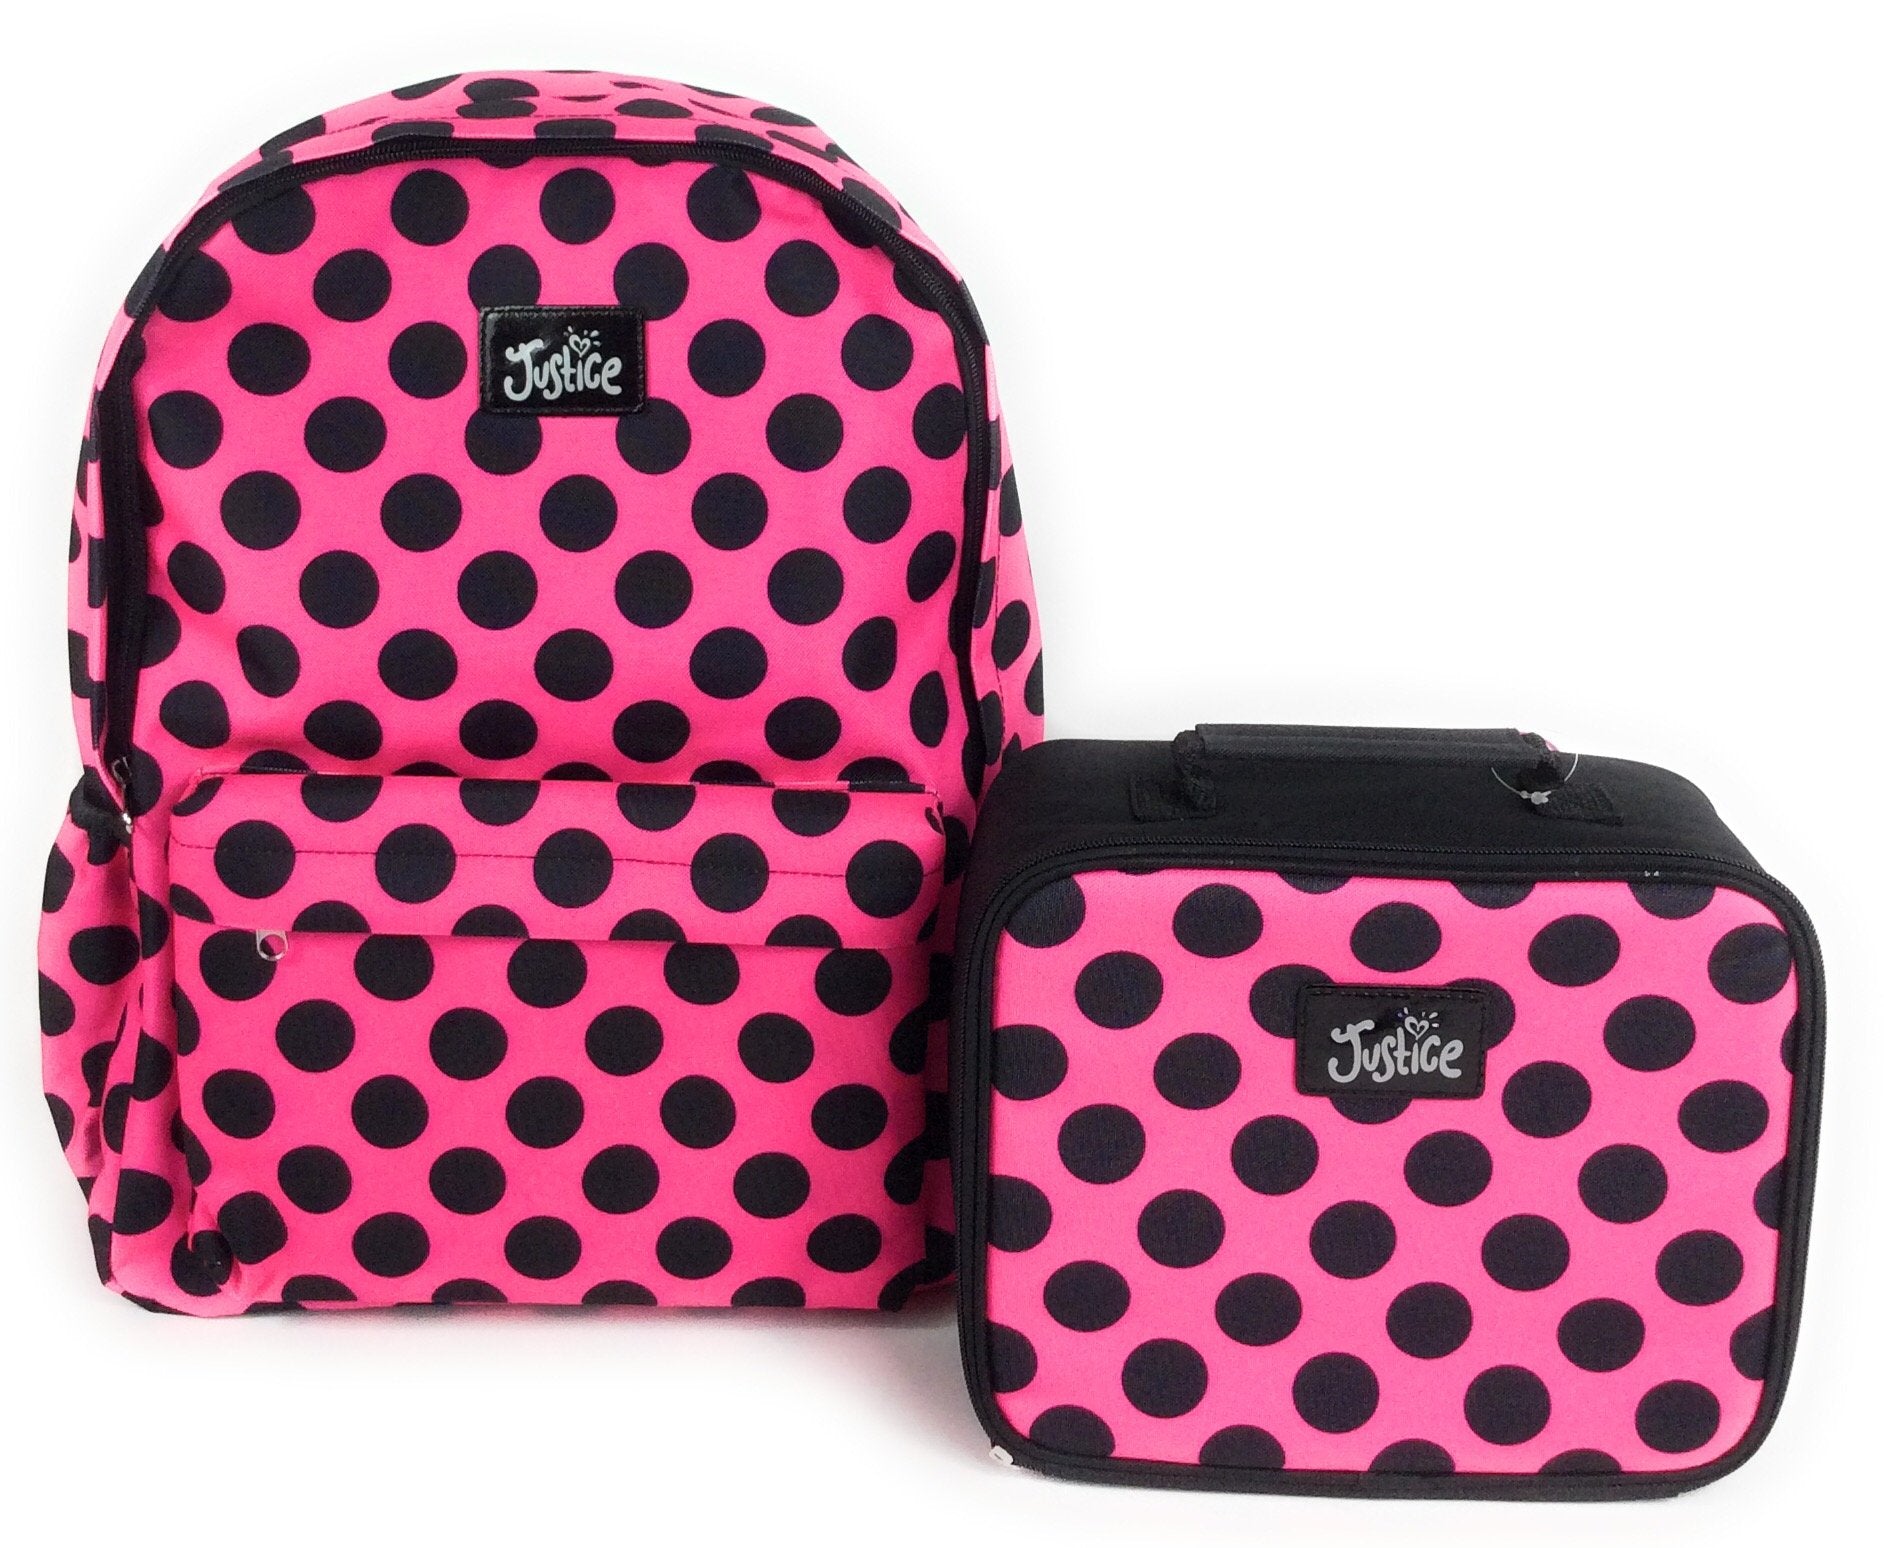 A pink PU fashionable dot print combination backpack backpack for